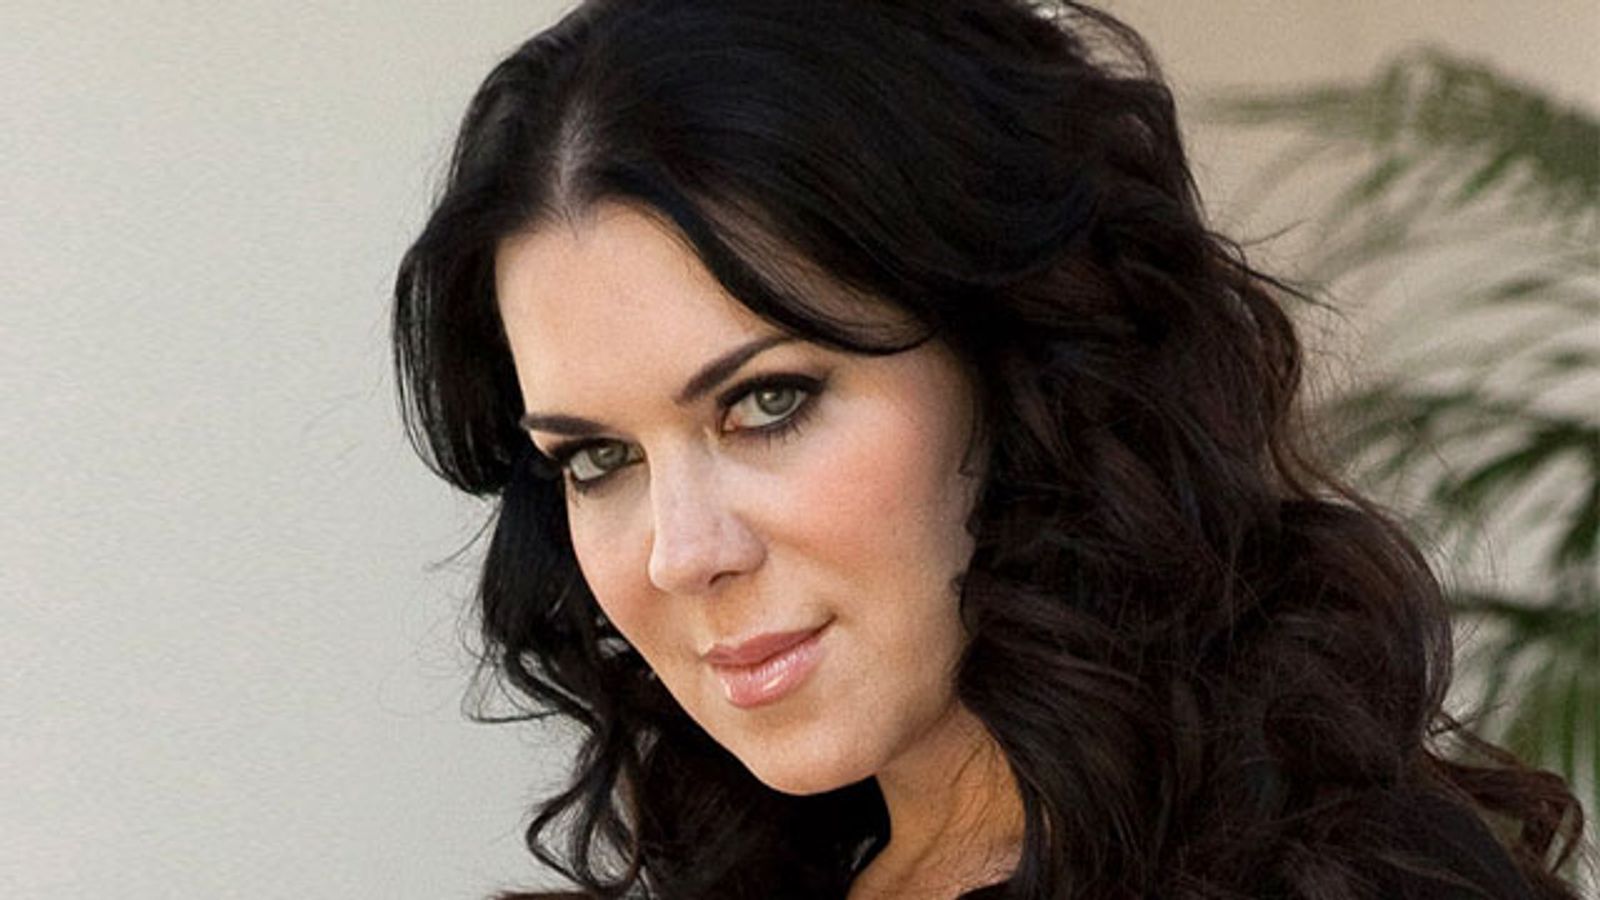 Chyna's Manager Says Death Caused by Accidental OD